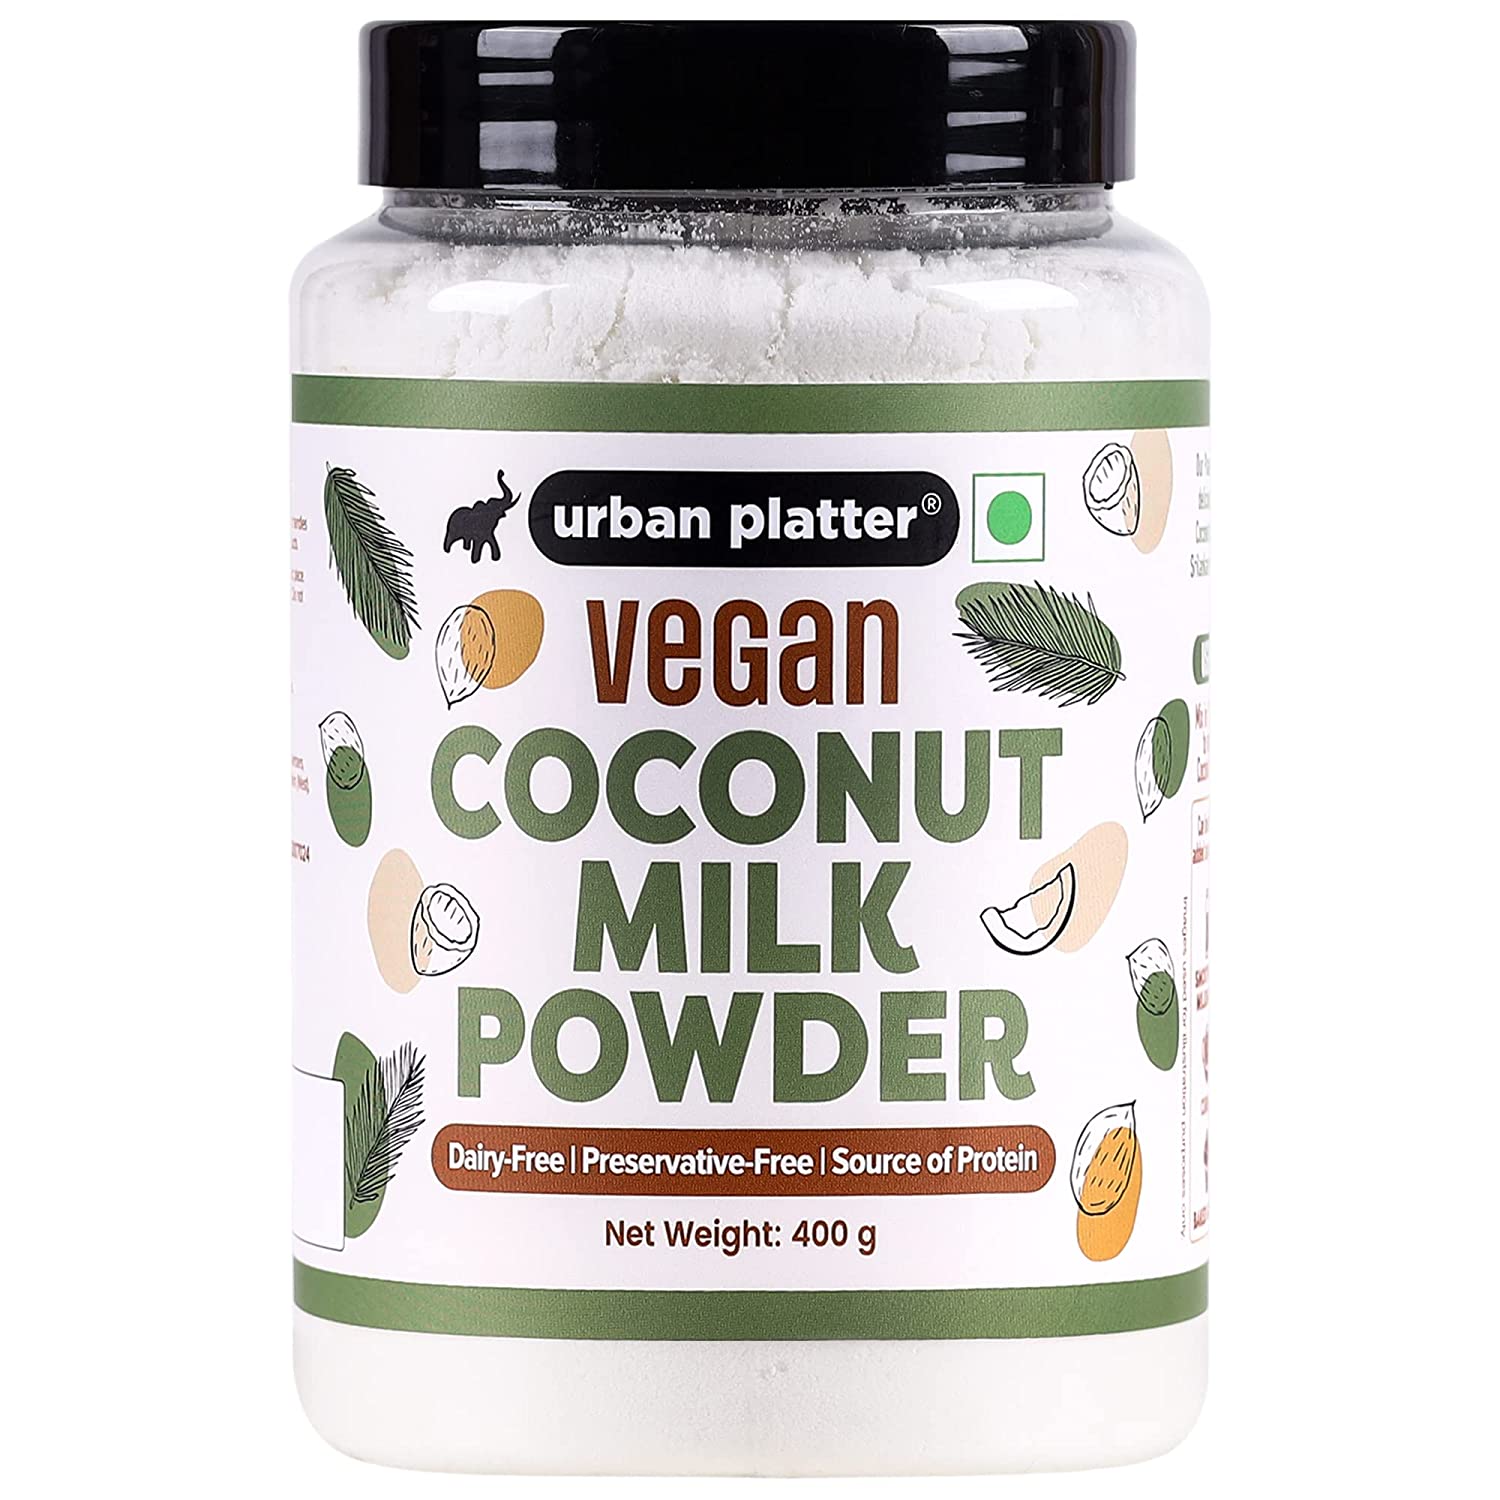 Urban Platter Coconut Milk Powder, 400g | Preservative-Free | Easy to use | Product of Sri Lanka | Dairy-Free | Source of Protein | Add to Smoothies | curries, Baked Goods.